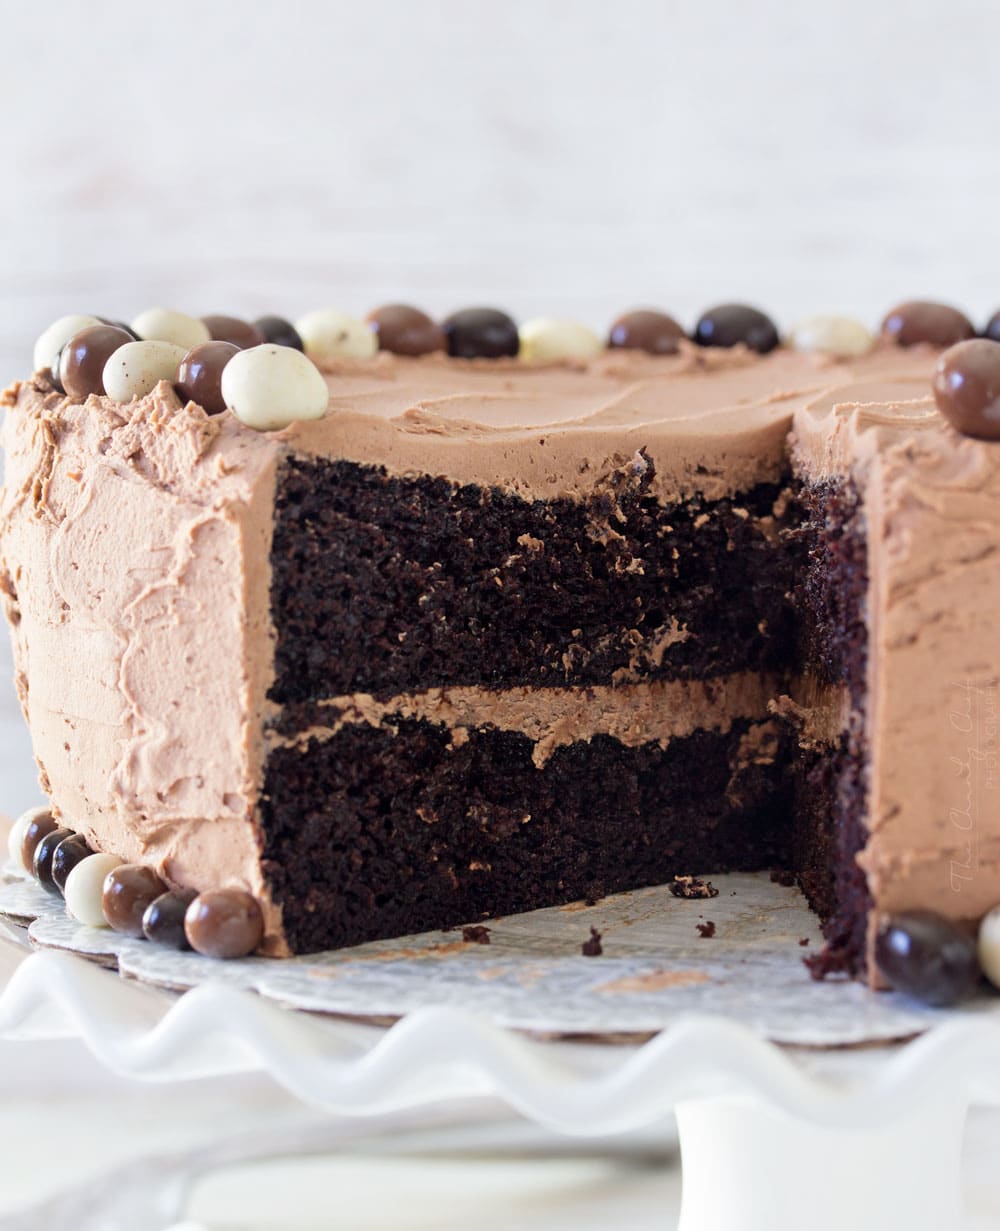 Buttermilk-Chocolate-Layer-Cake | The ULTIMATE soft and fluffy chocolate layer cake. Made from scratch with buttermilk, and slathered in an ultra creamy buttercream frosting! | http://thechunkychef.com